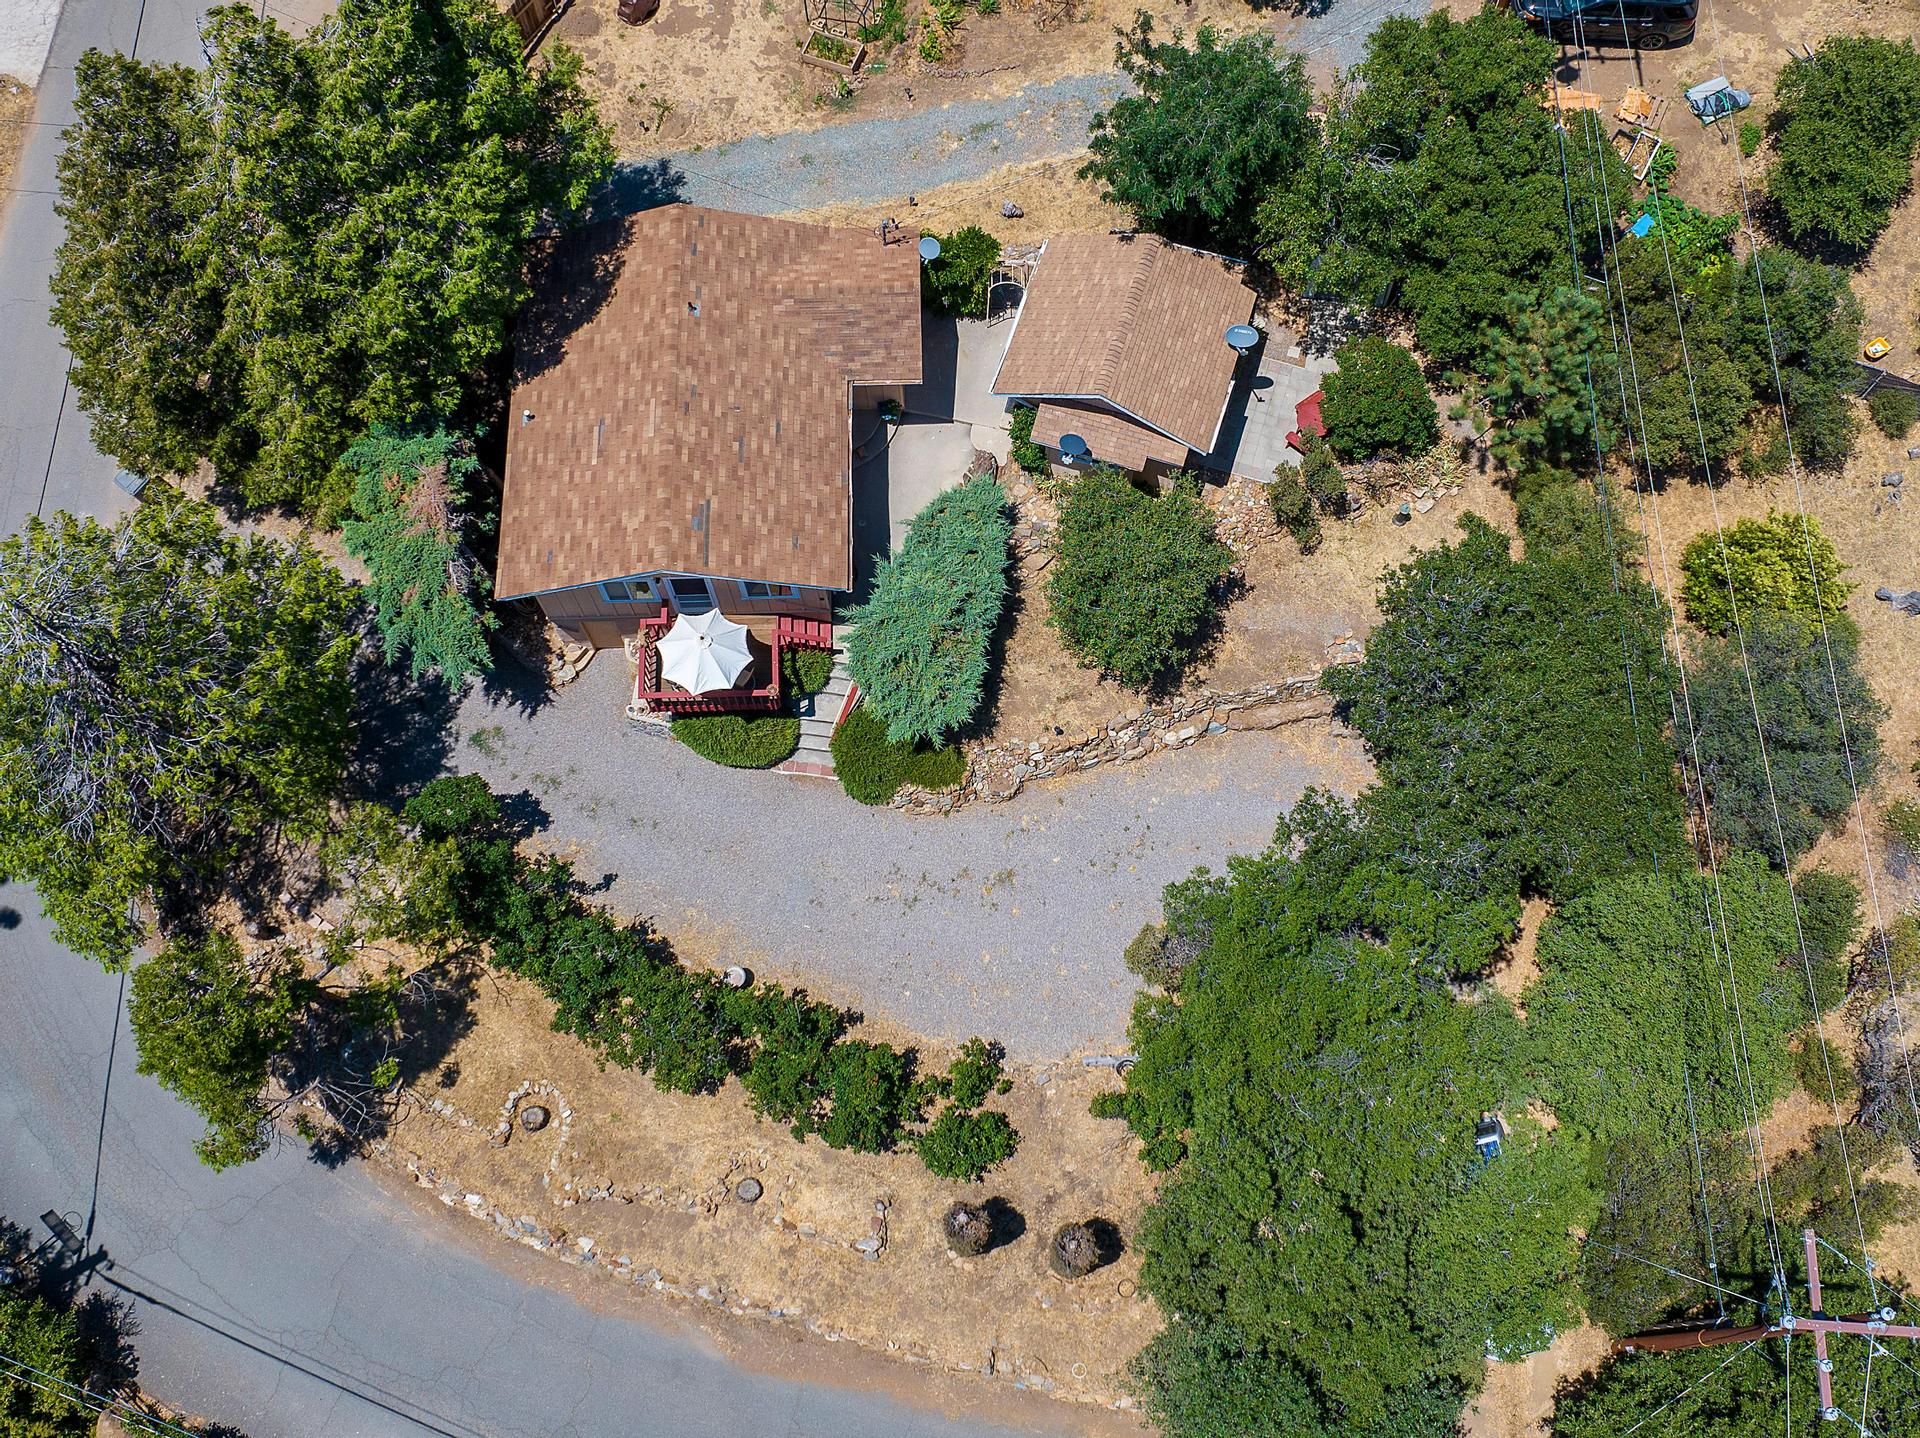 Overhead view of Whispering Pines property